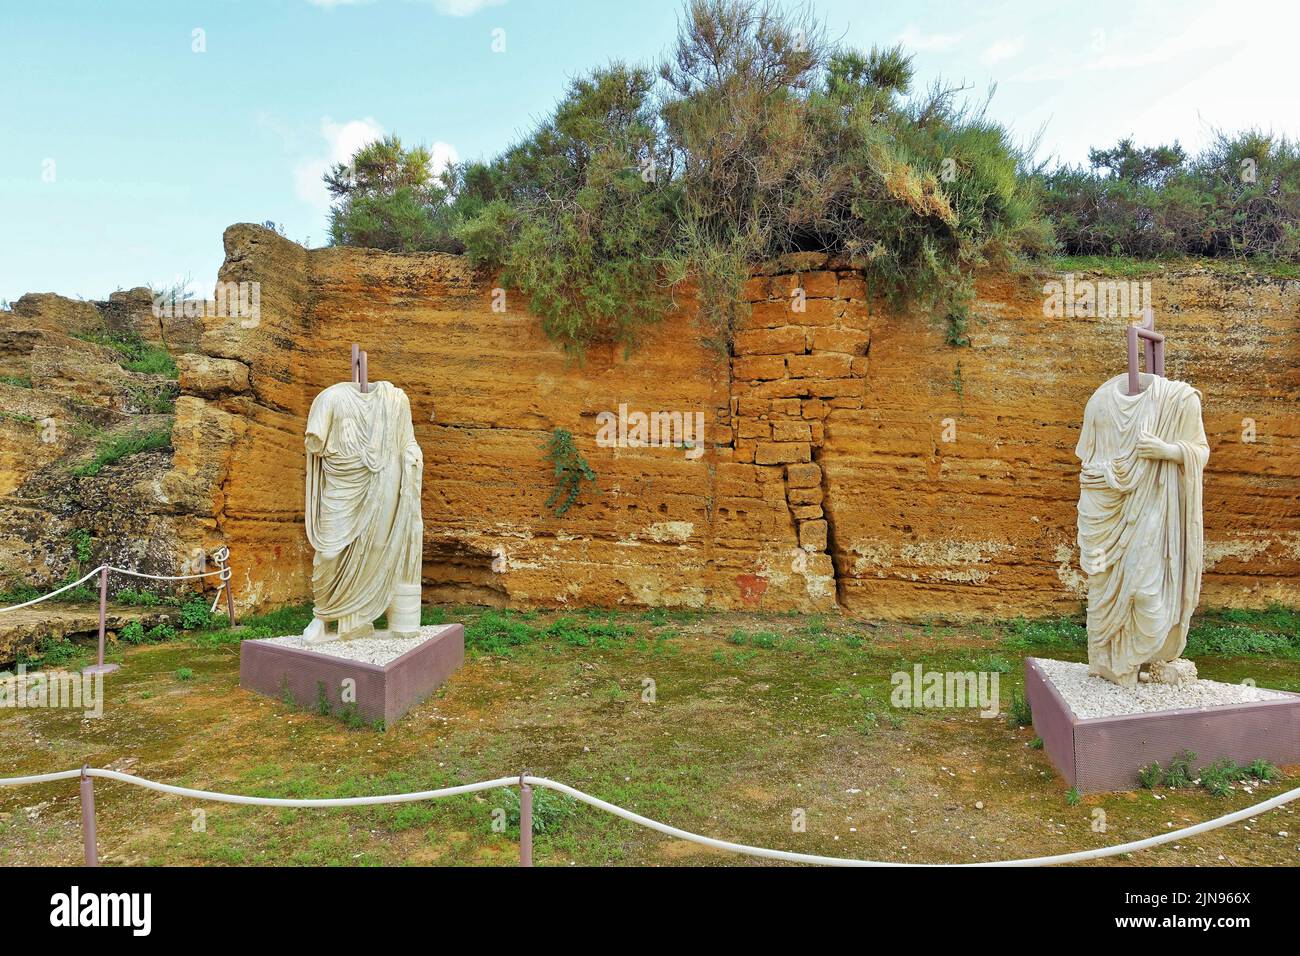 Headless marble statues, Valley of Temples, Agrigento, Sicily, Italy, Europe Stock Photo